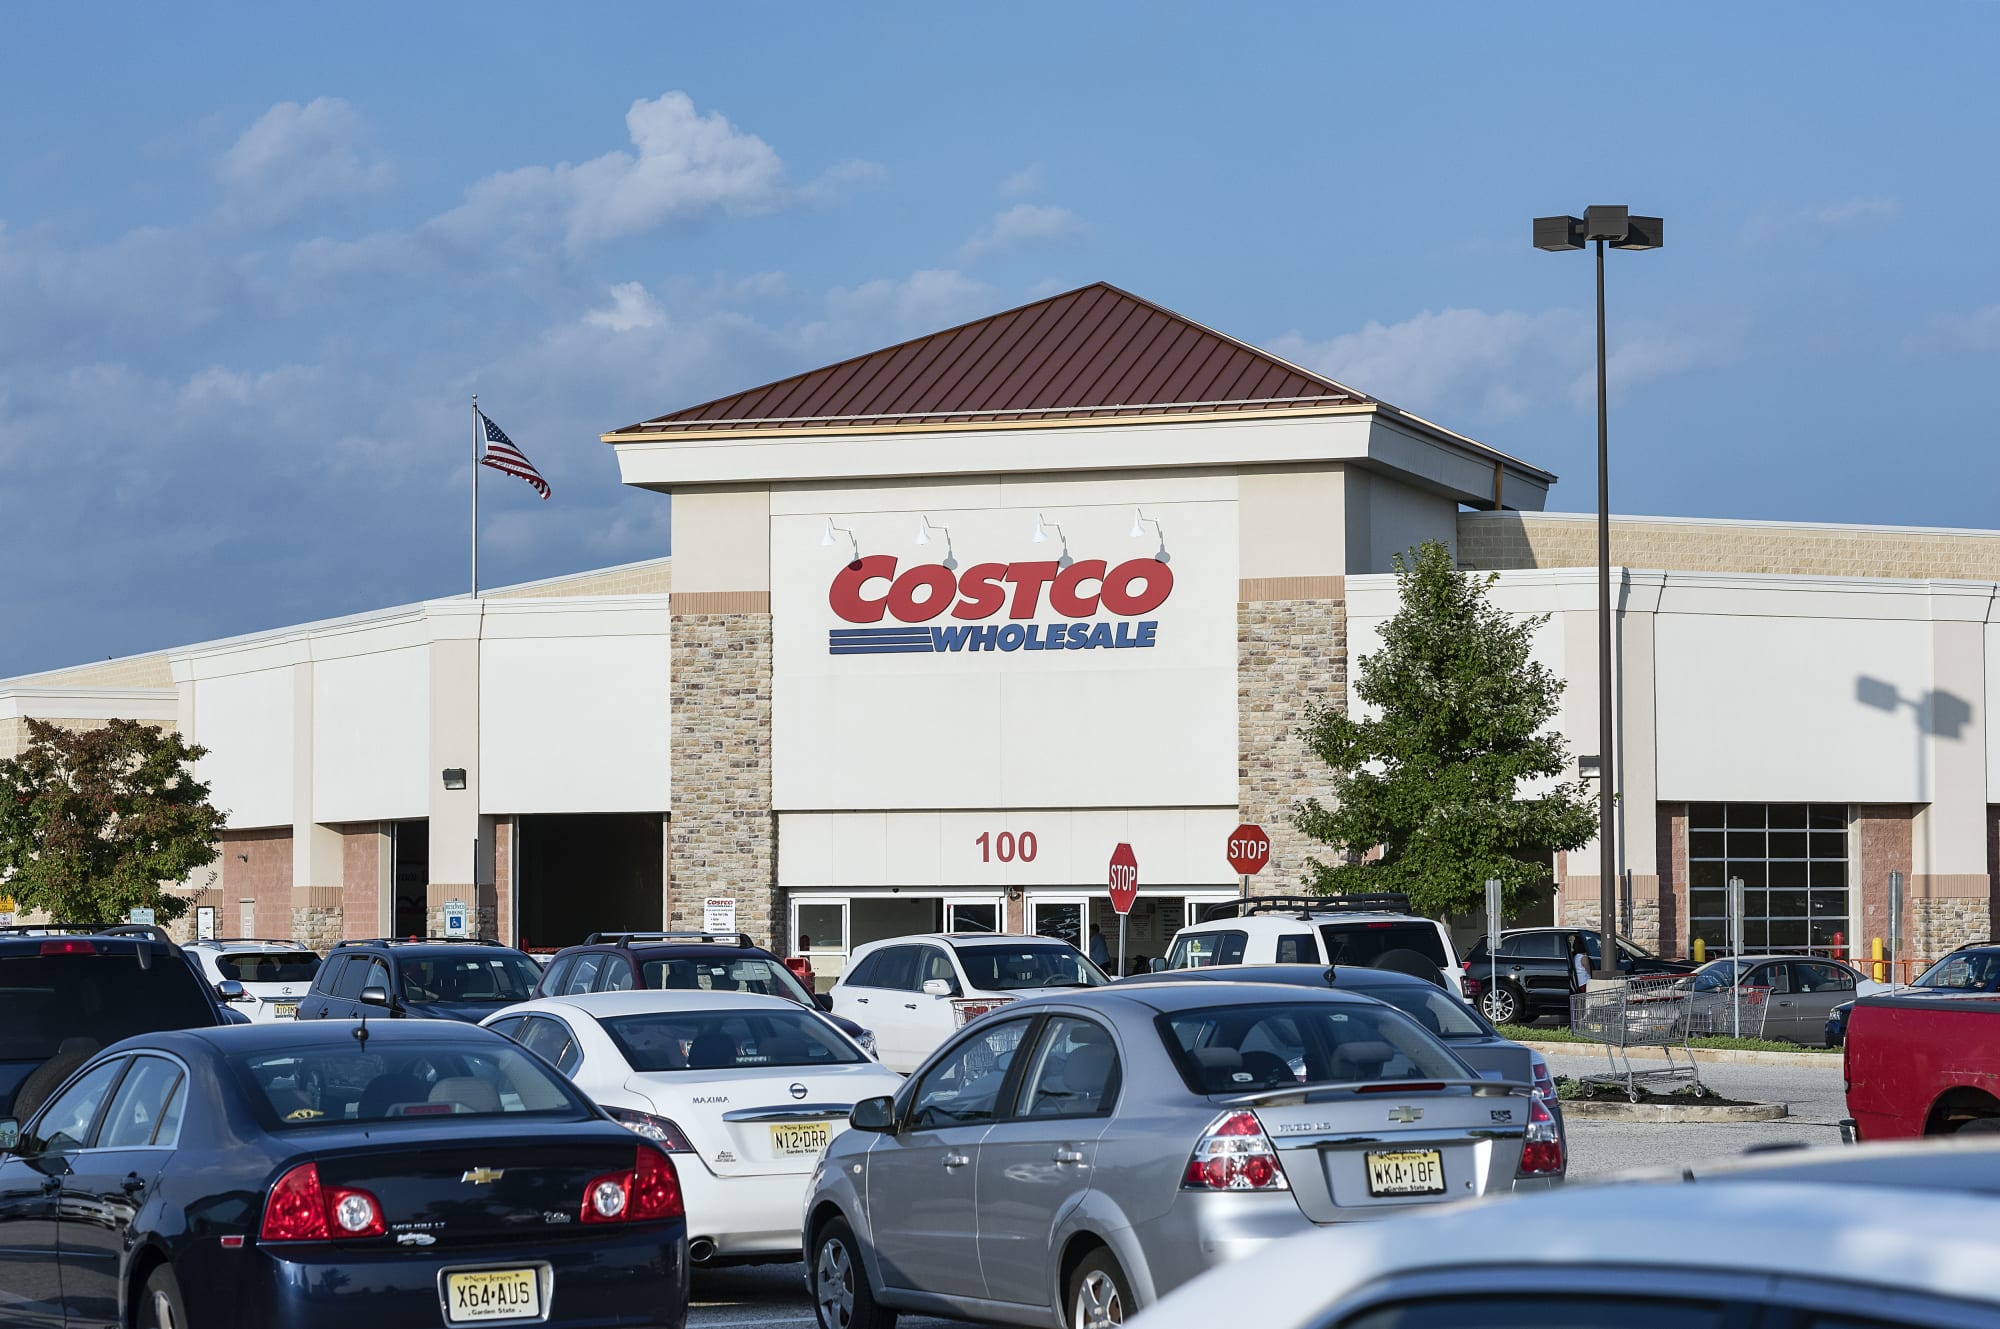 What time does Costco open the day after Christmas?